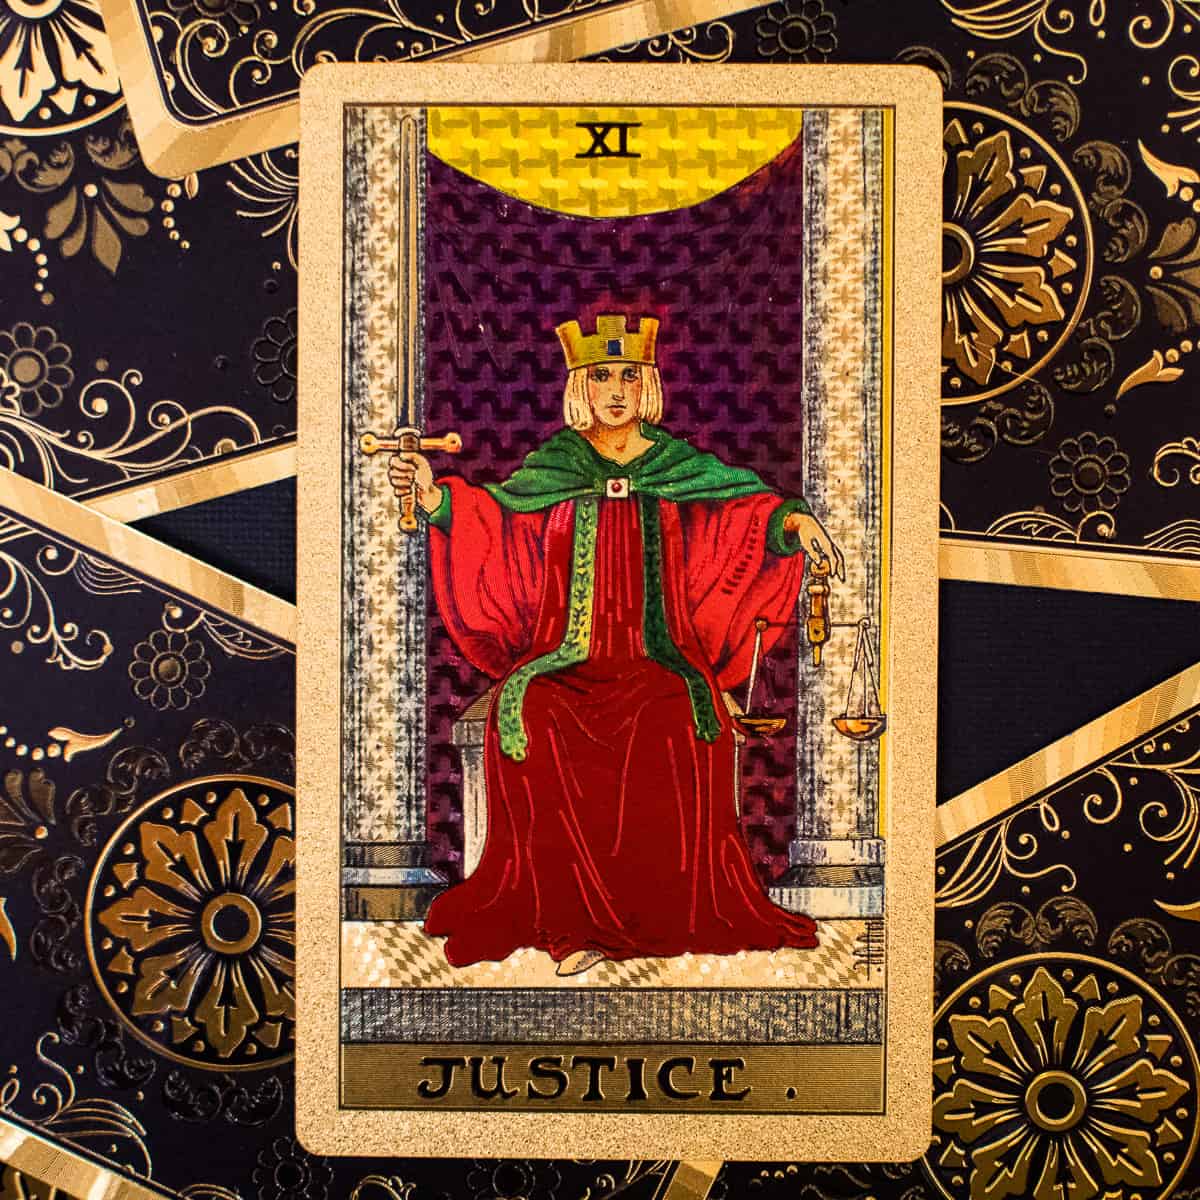 An individual holding scales and a scepter on a tarot card.